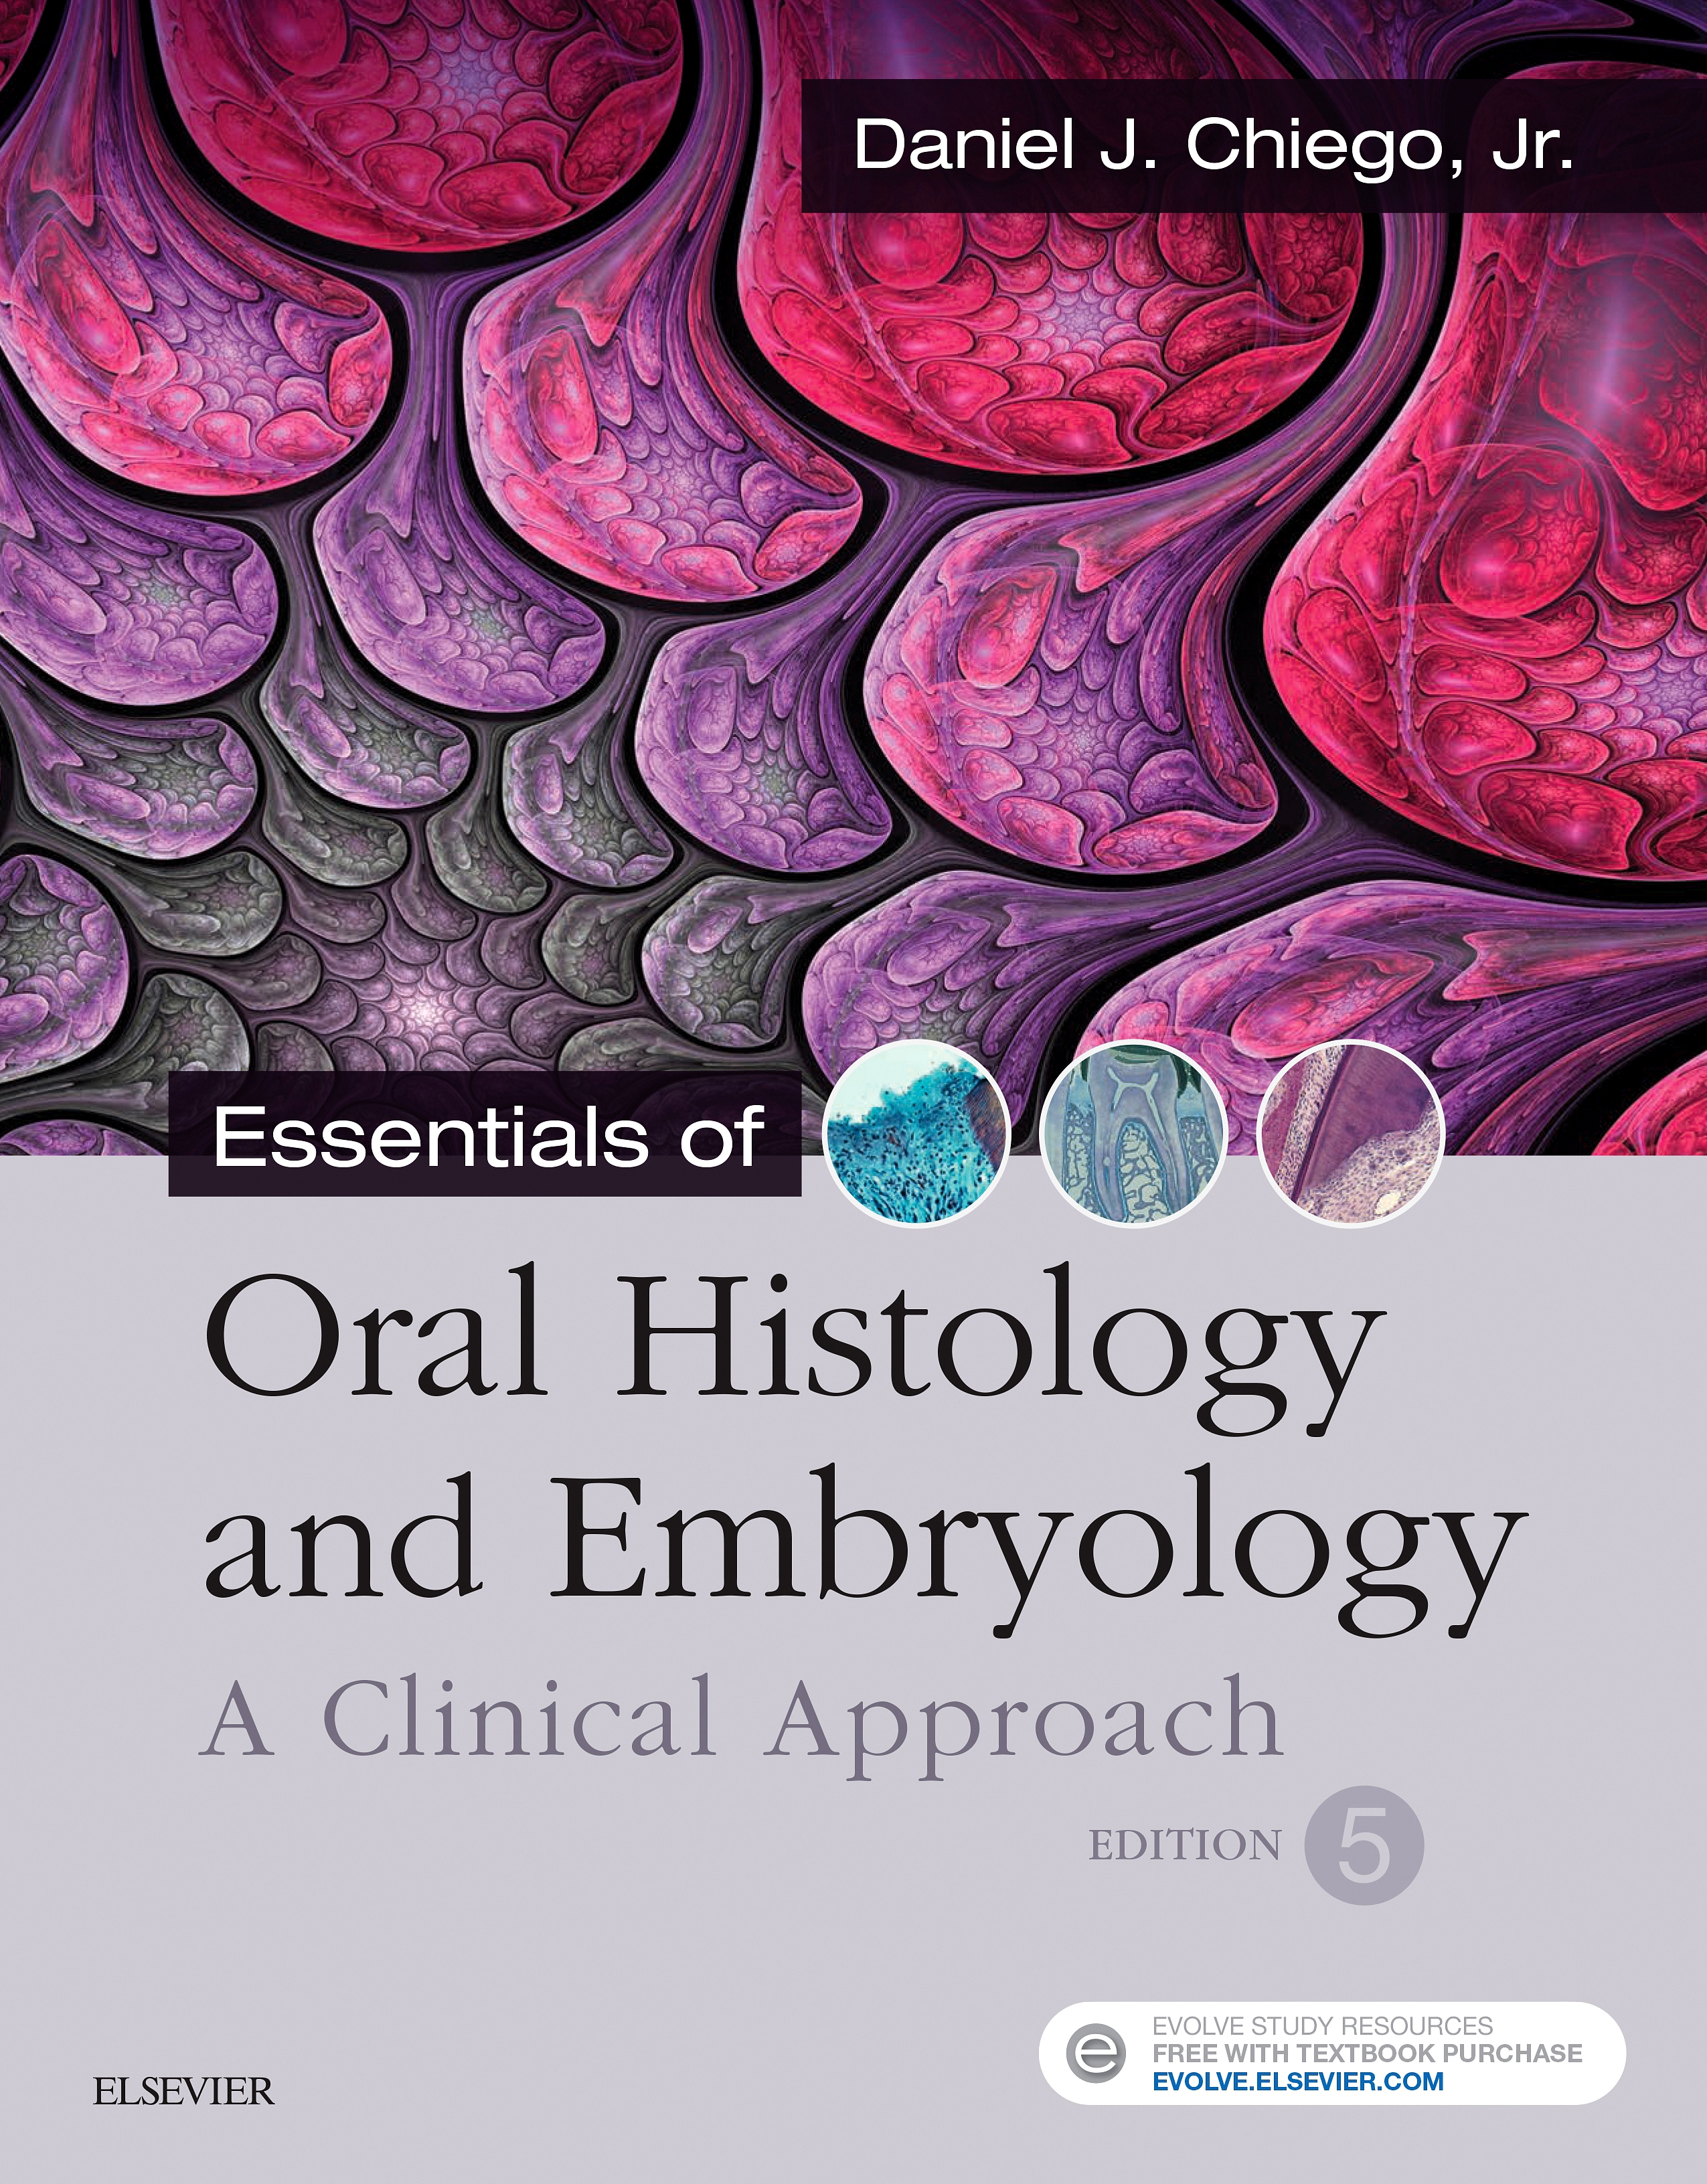 Evolve Resources for Essentials of Oral Histology and Embryology, 5th